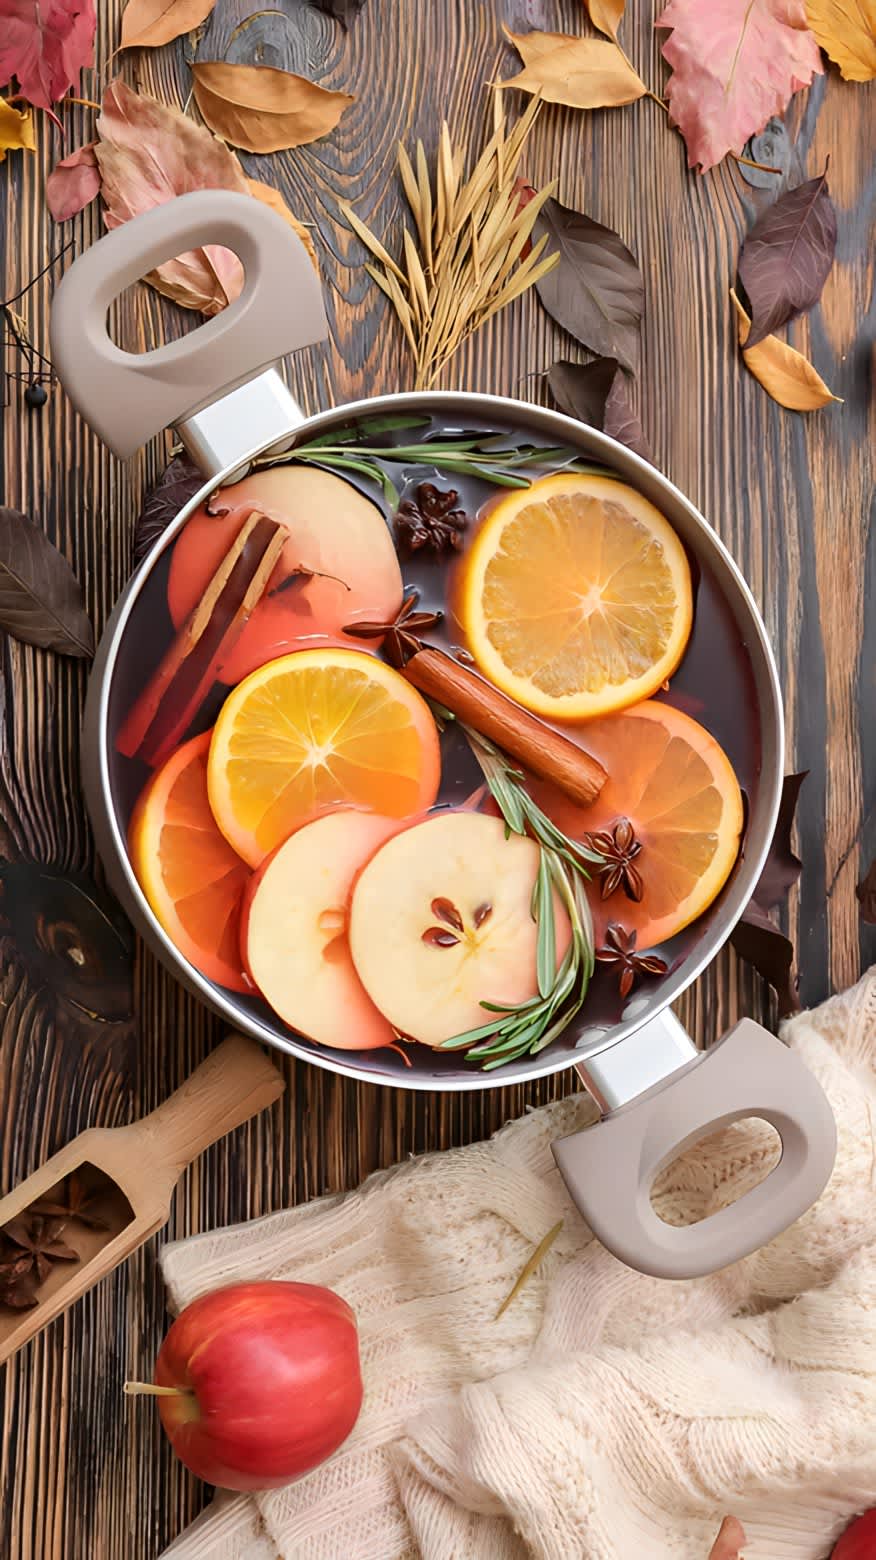 Simmer pot with oranges, apples, and cinnamon